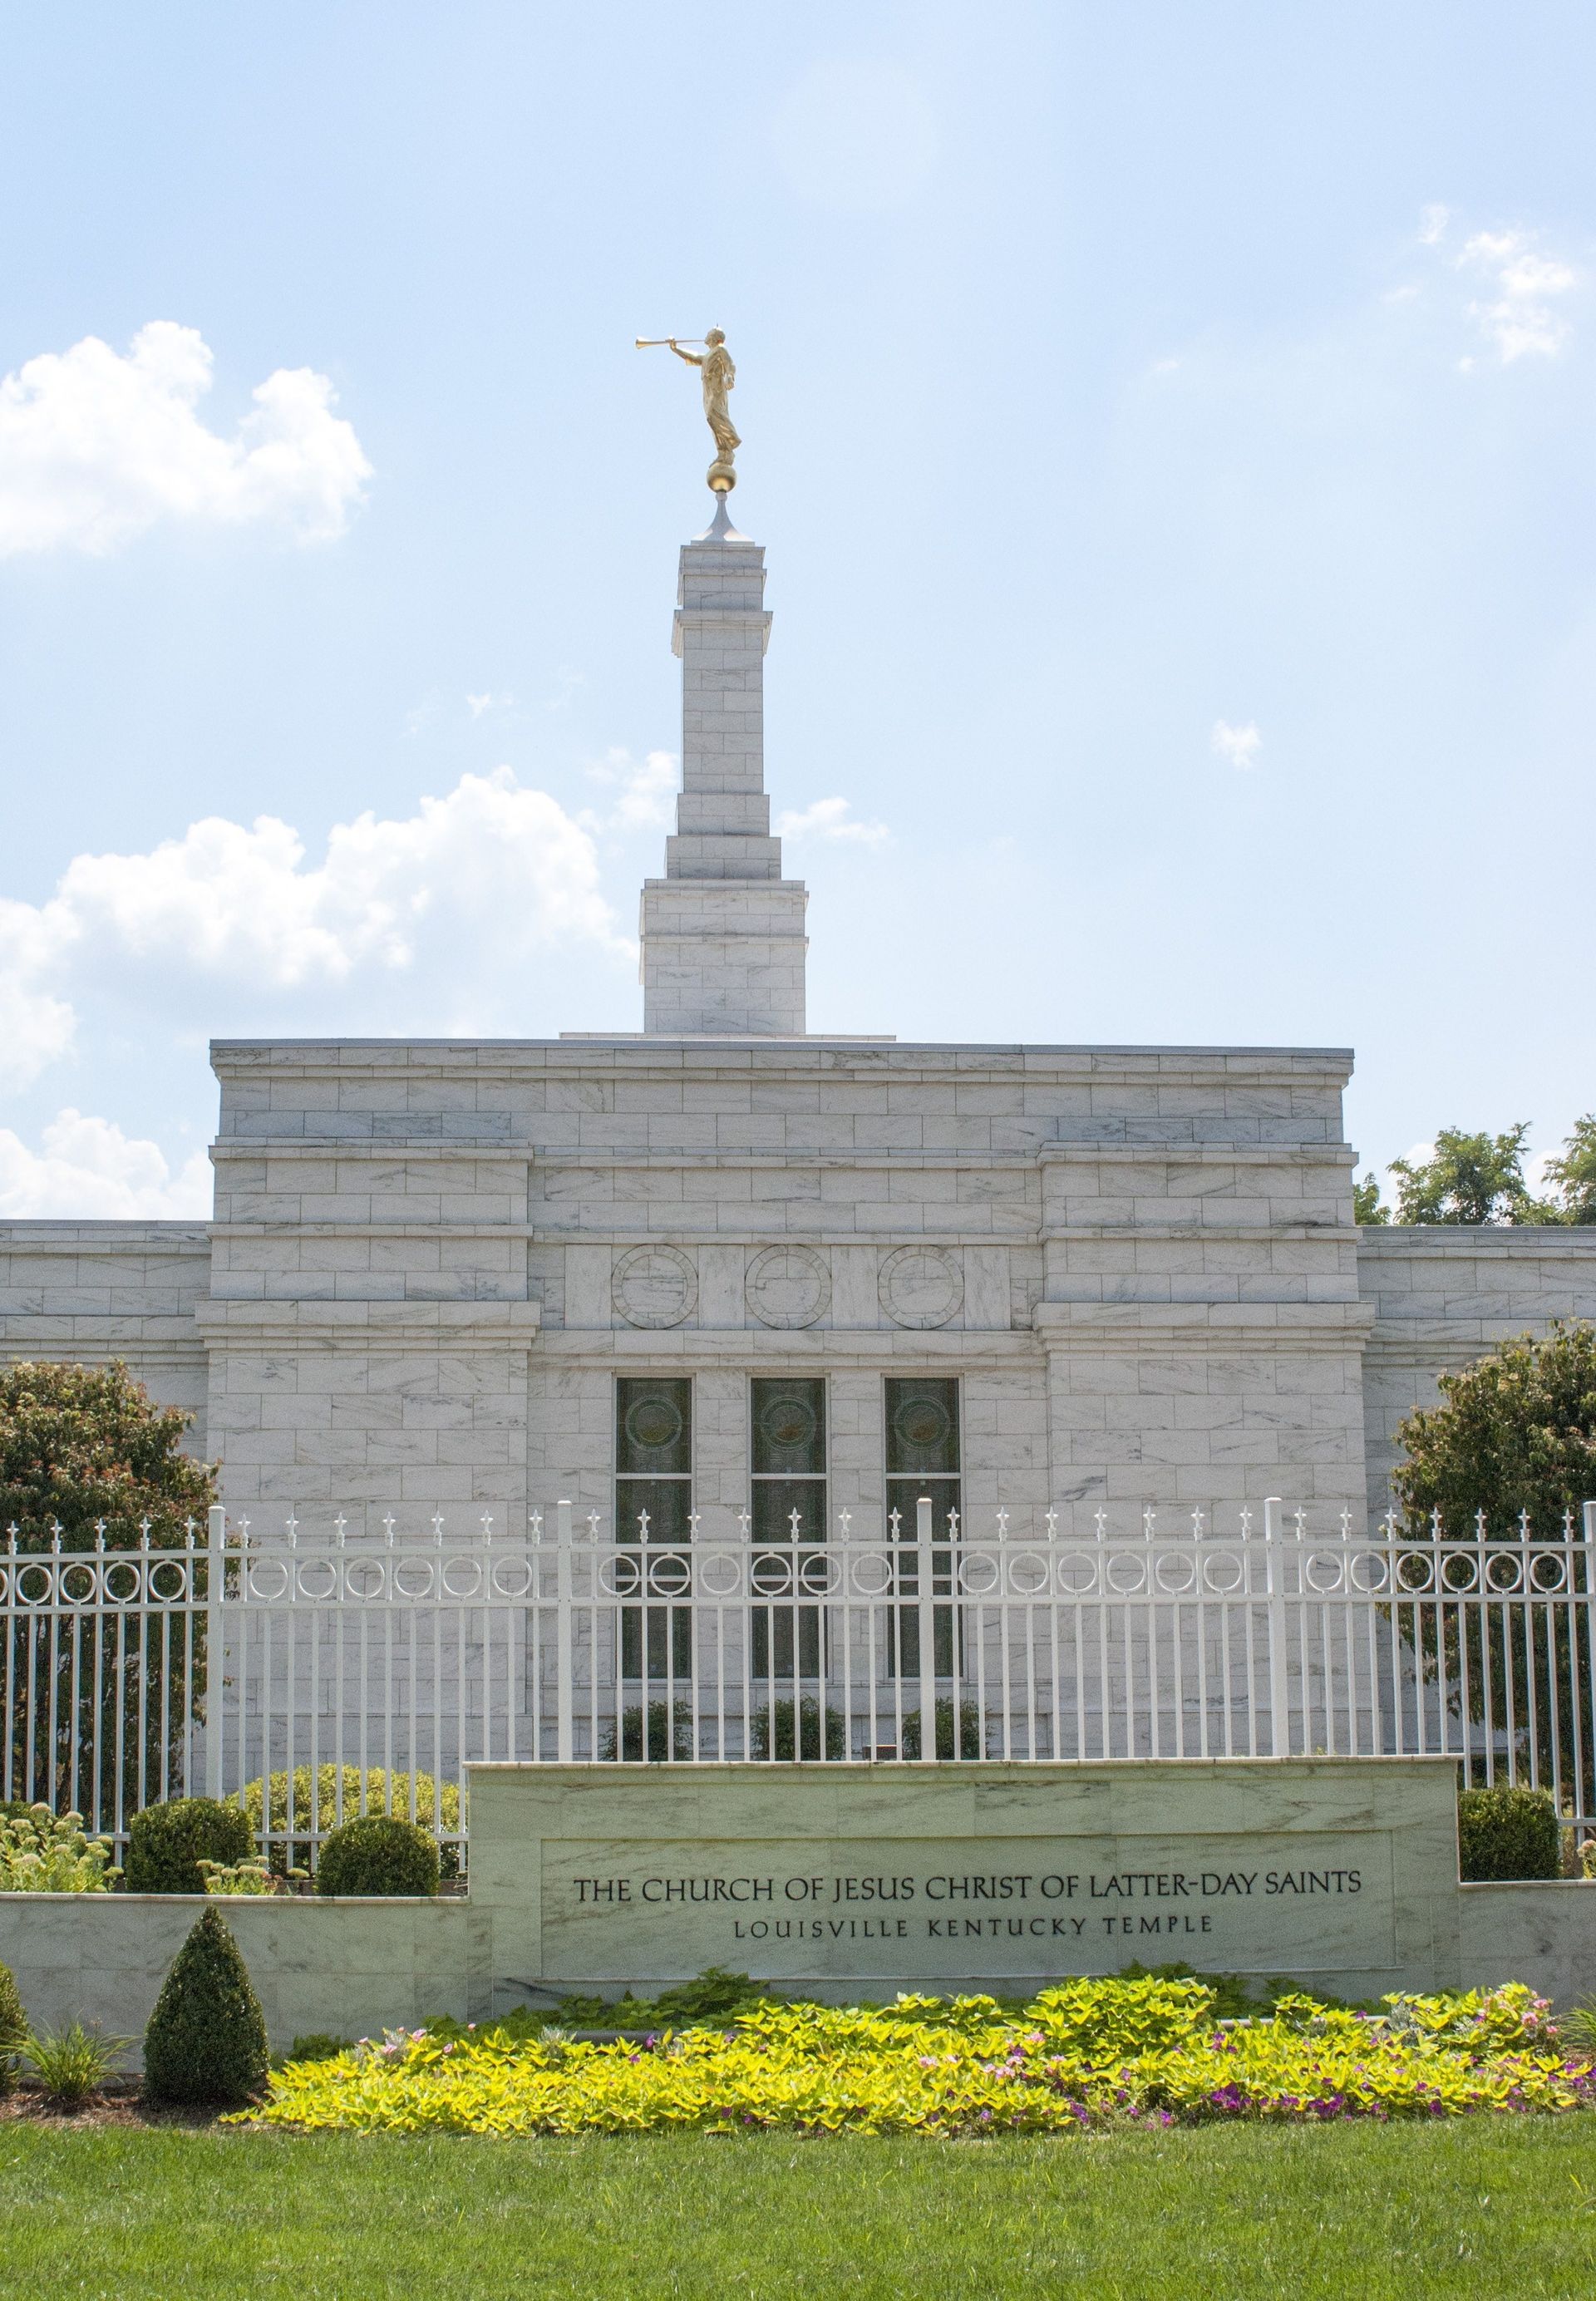 The Louisville Kentucky Temple name sign, including the exterior of the temple.